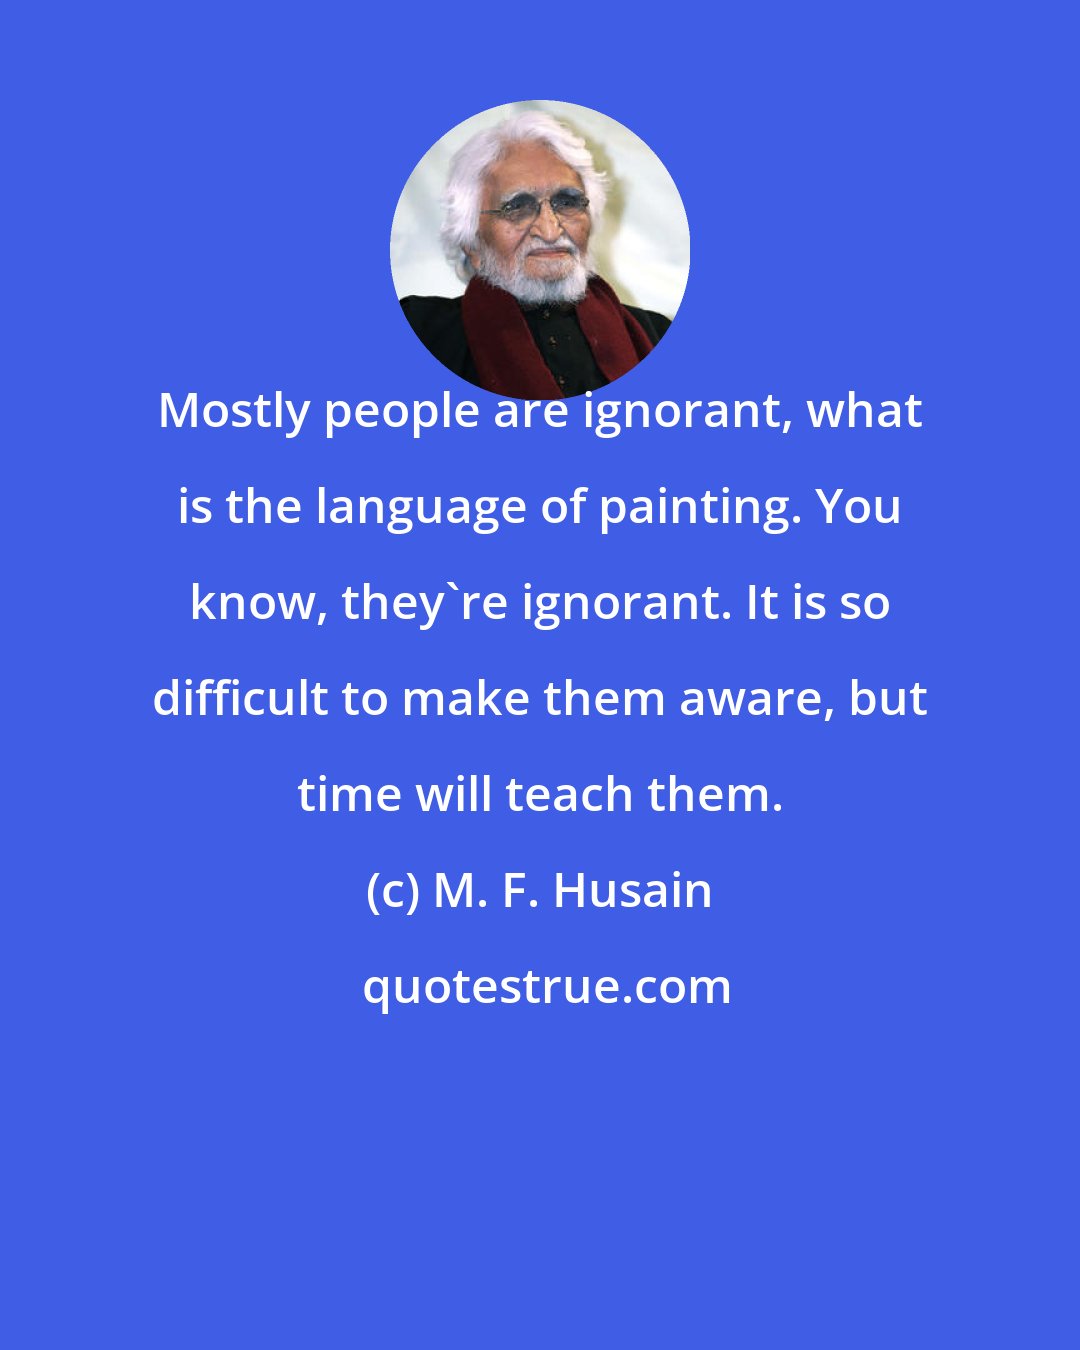 M. F. Husain: Mostly people are ignorant, what is the language of painting. You know, they're ignorant. It is so difficult to make them aware, but time will teach them.